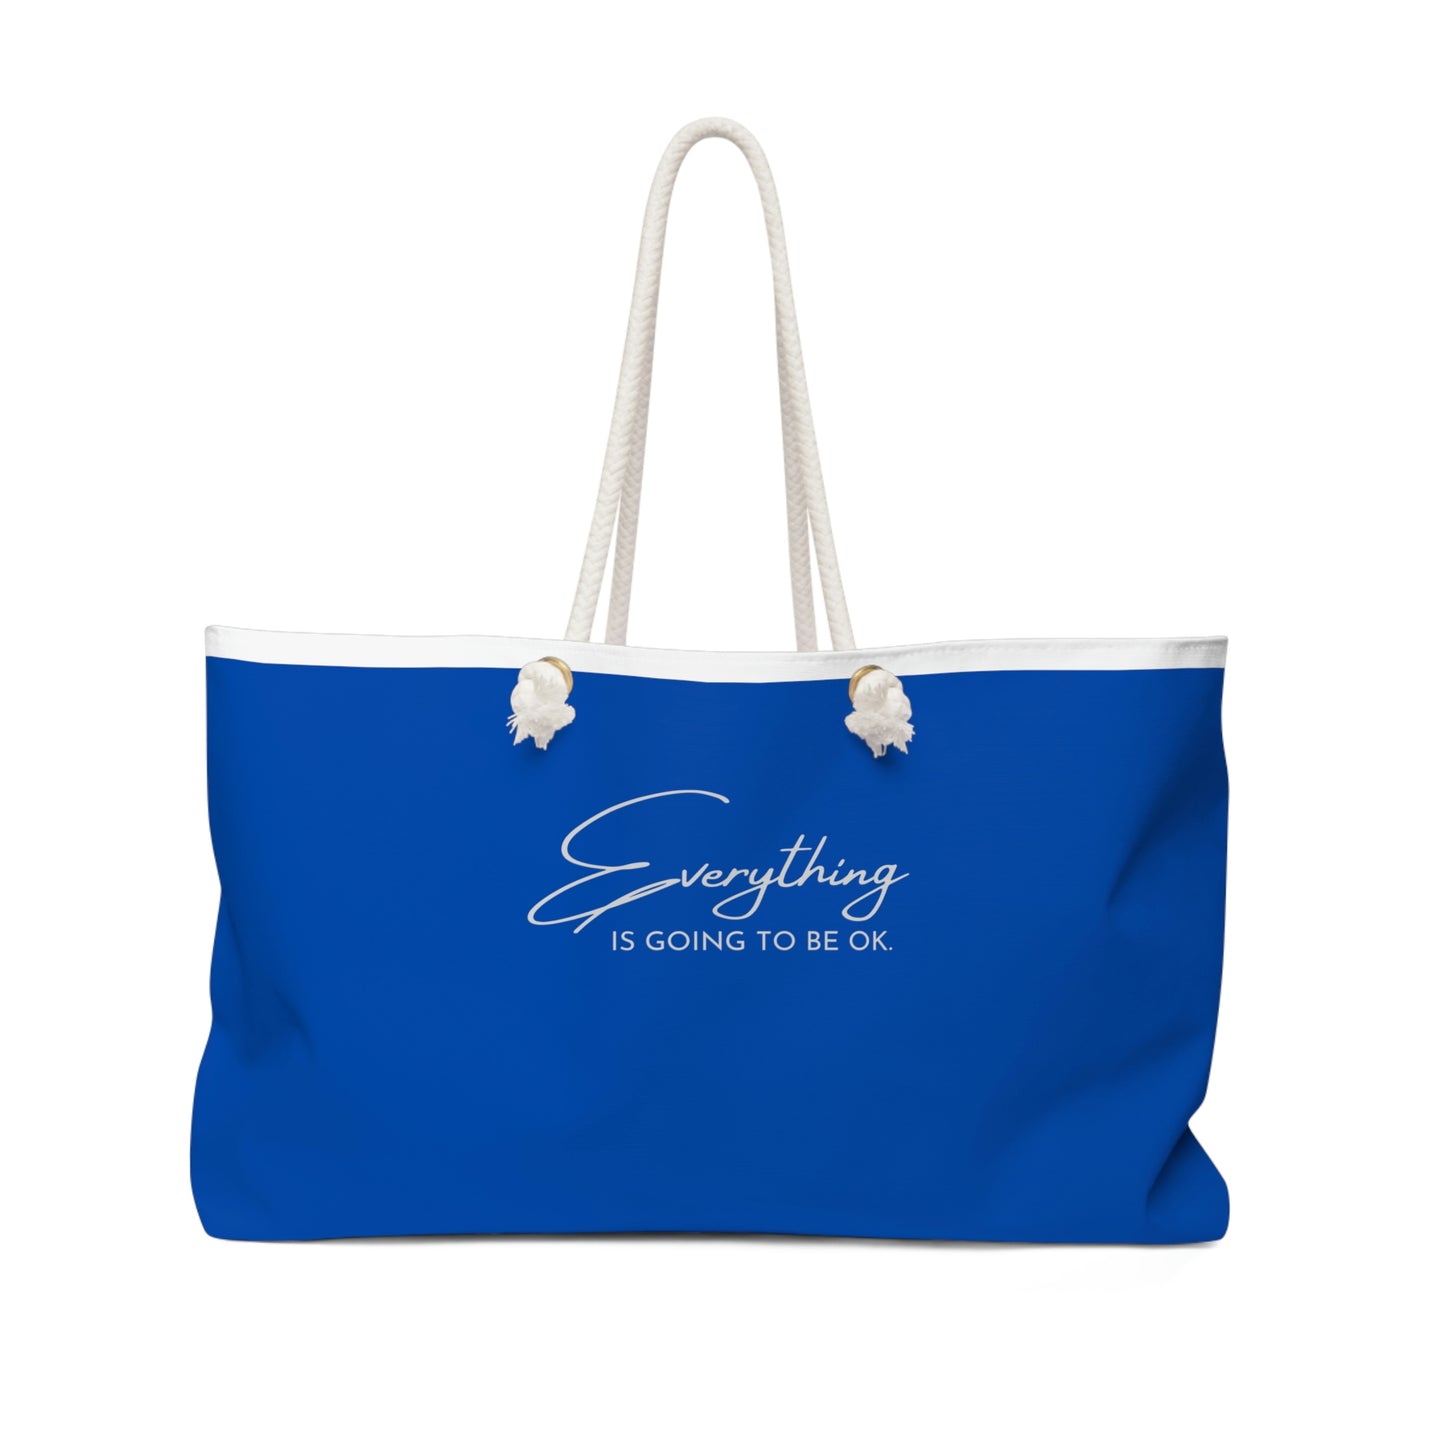 "Everything is going to be Ok" Weekender Tote Bag